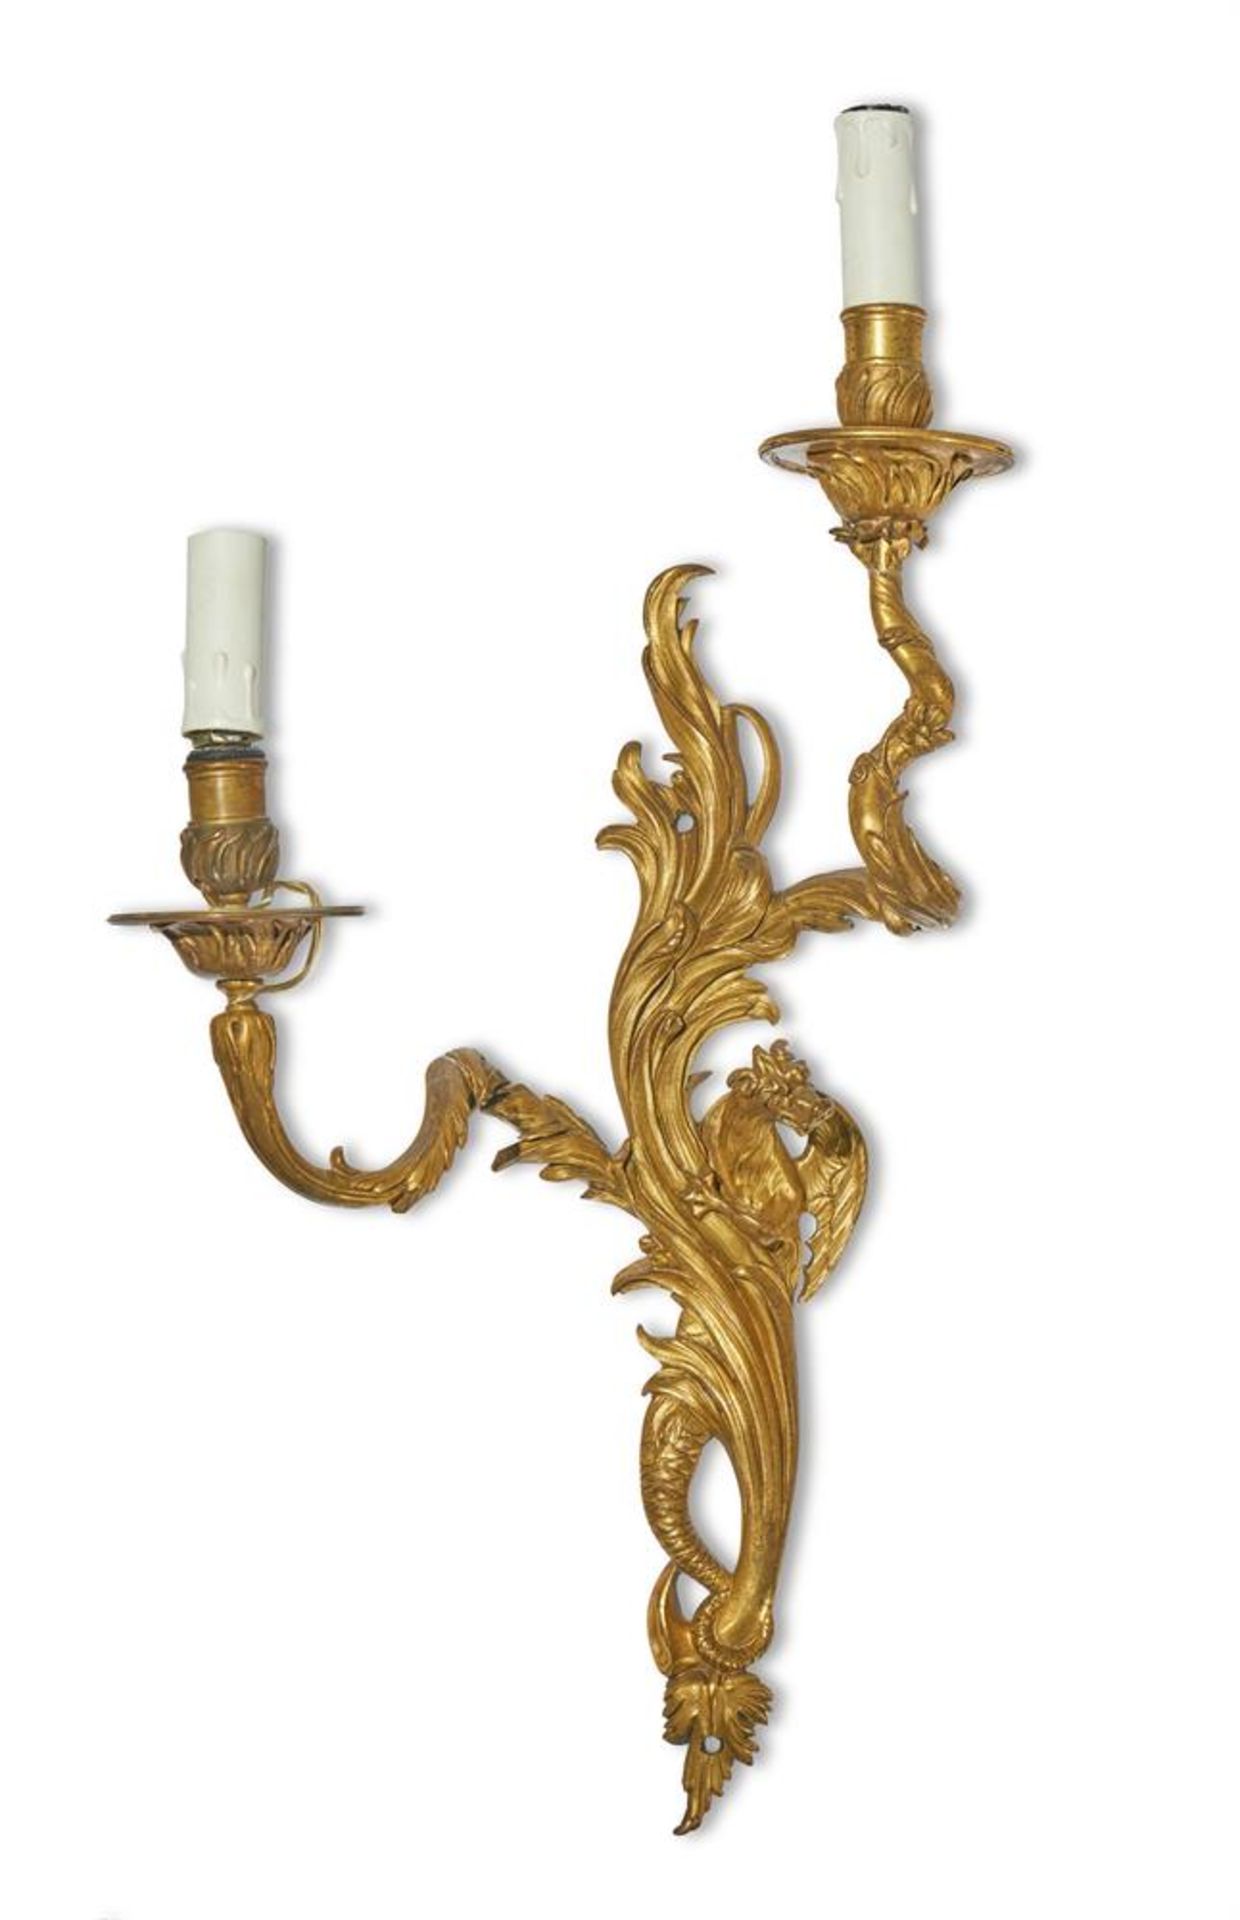 A PAIR OF ORMOLU TWIN BRANCH WALL LIGHTS, 18TH CENTURY - Image 4 of 5